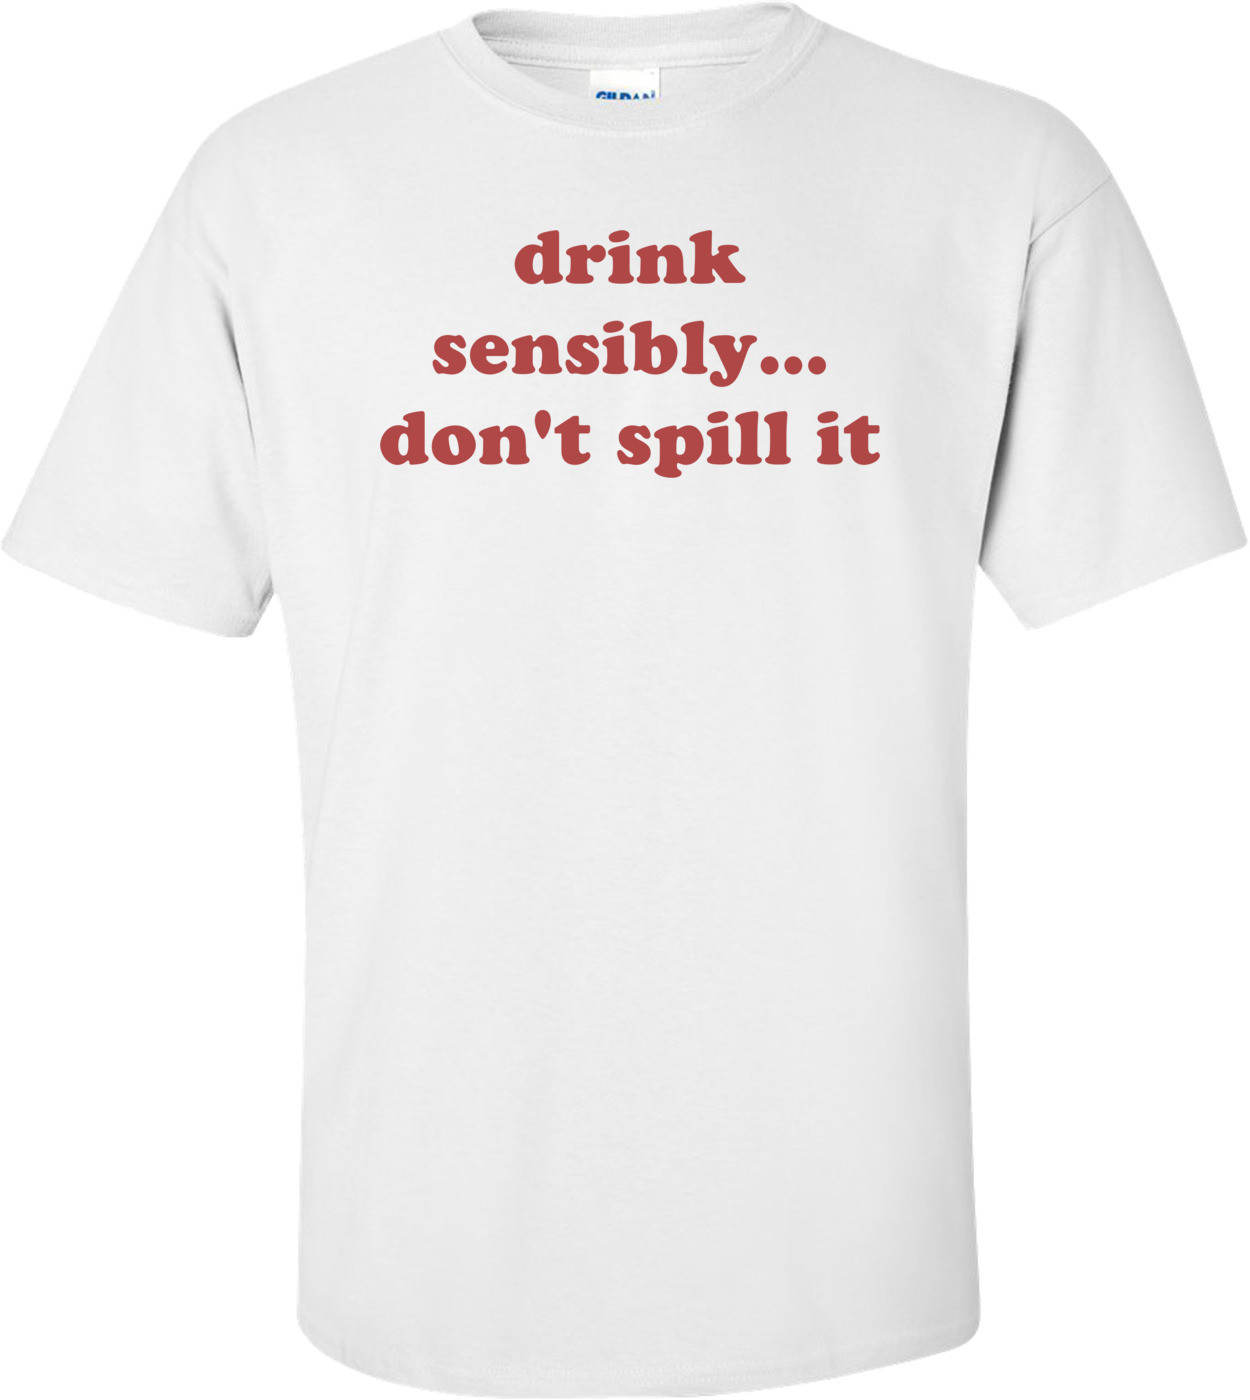 drink sensibly... don't spill it Shirt